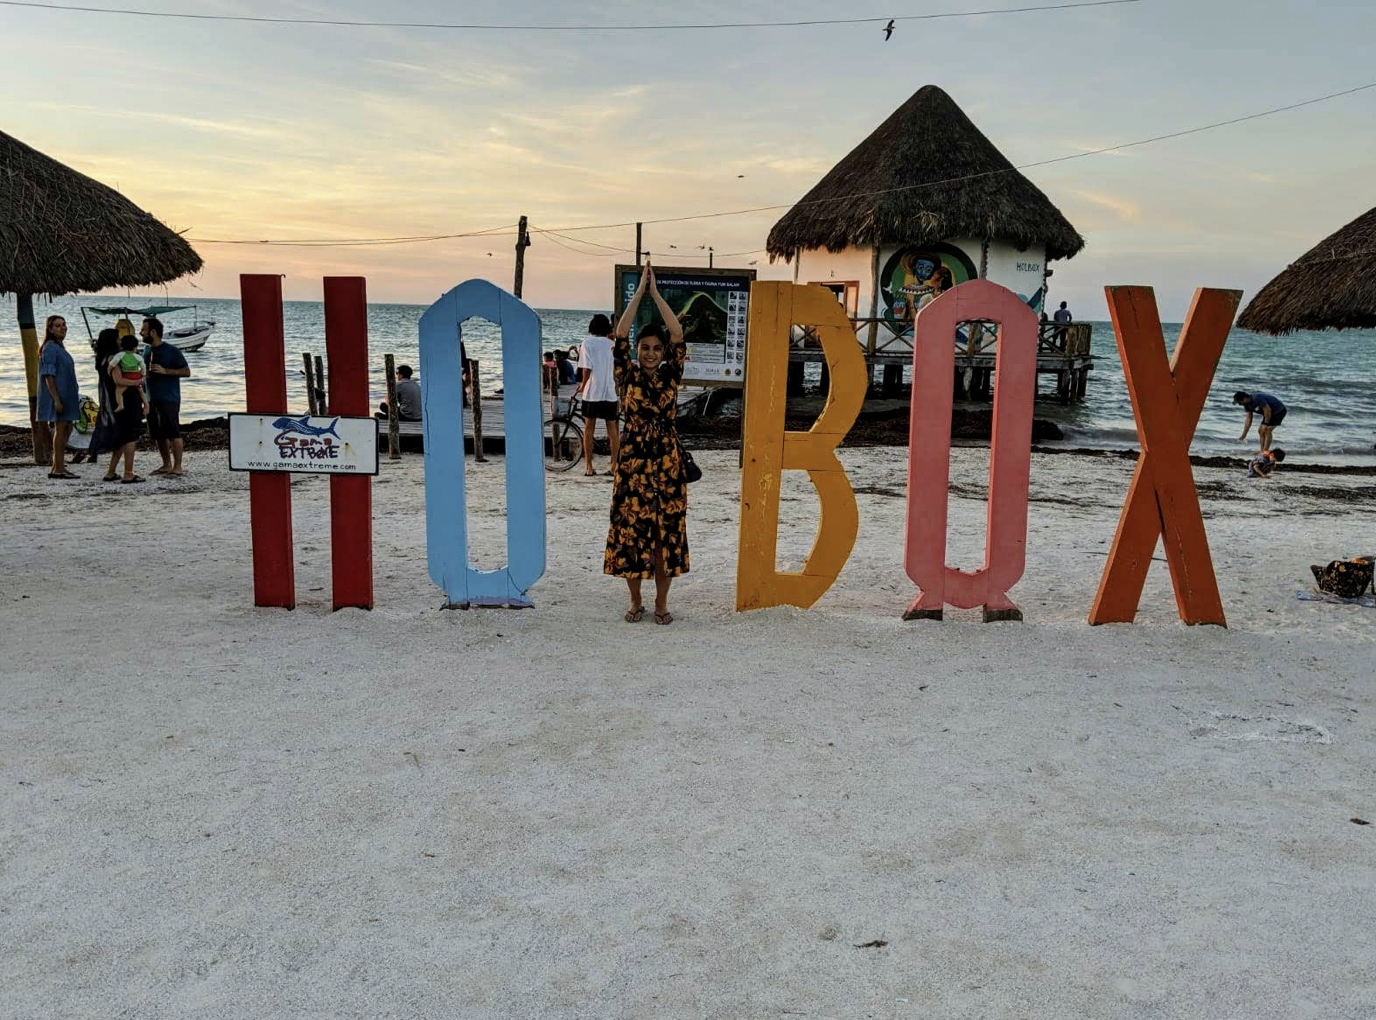 3 Days in Holbox, Mexico: What to Do, See & Eat